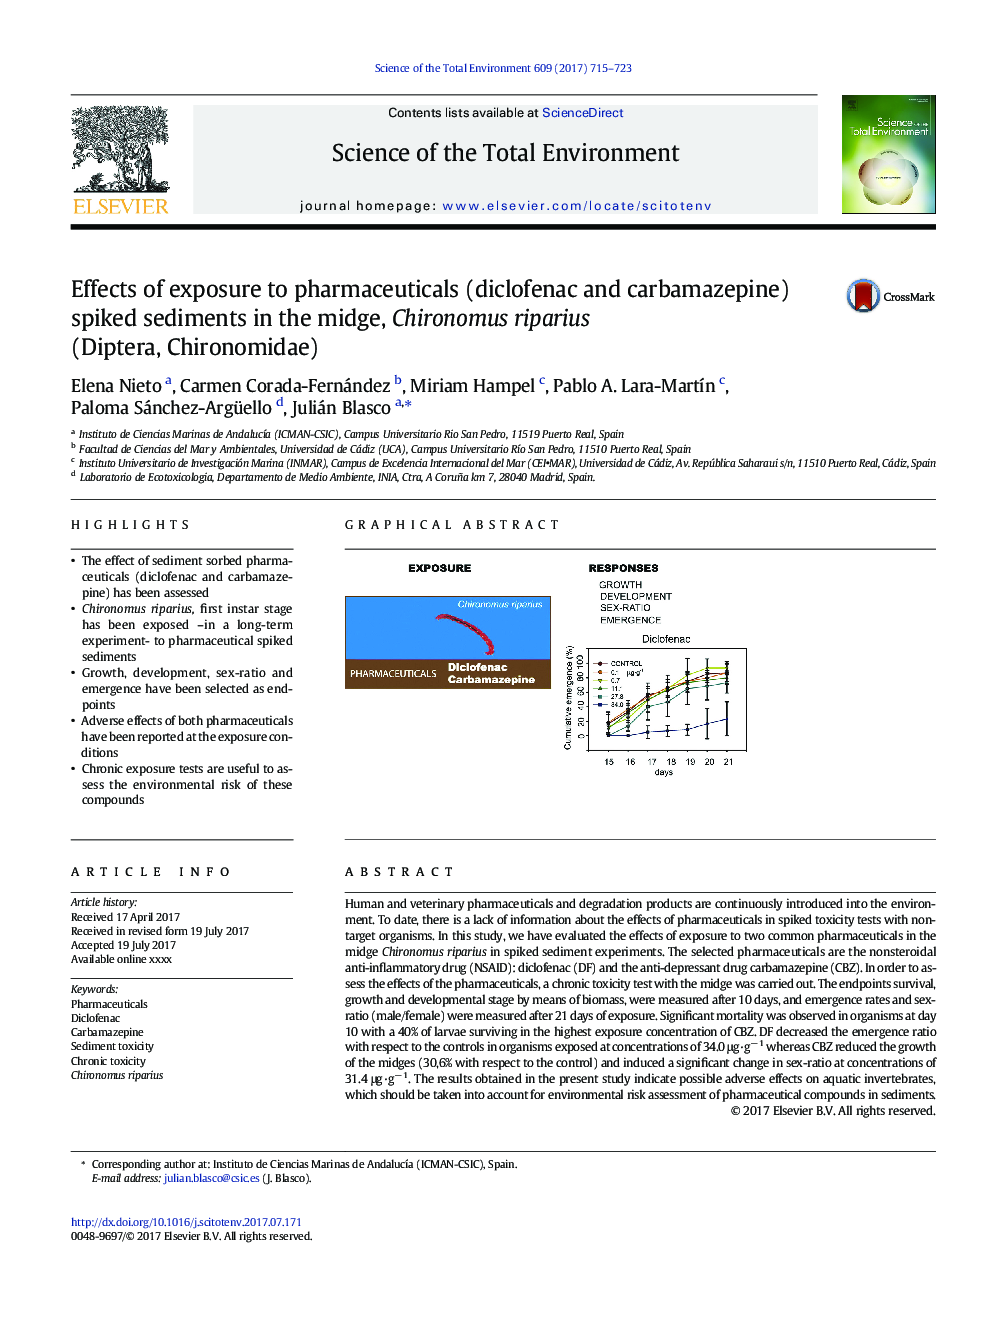 Effects of exposure to pharmaceuticals (diclofenac and carbamazepine) spiked sediments in the midge, Chironomus riparius (Diptera, Chironomidae)